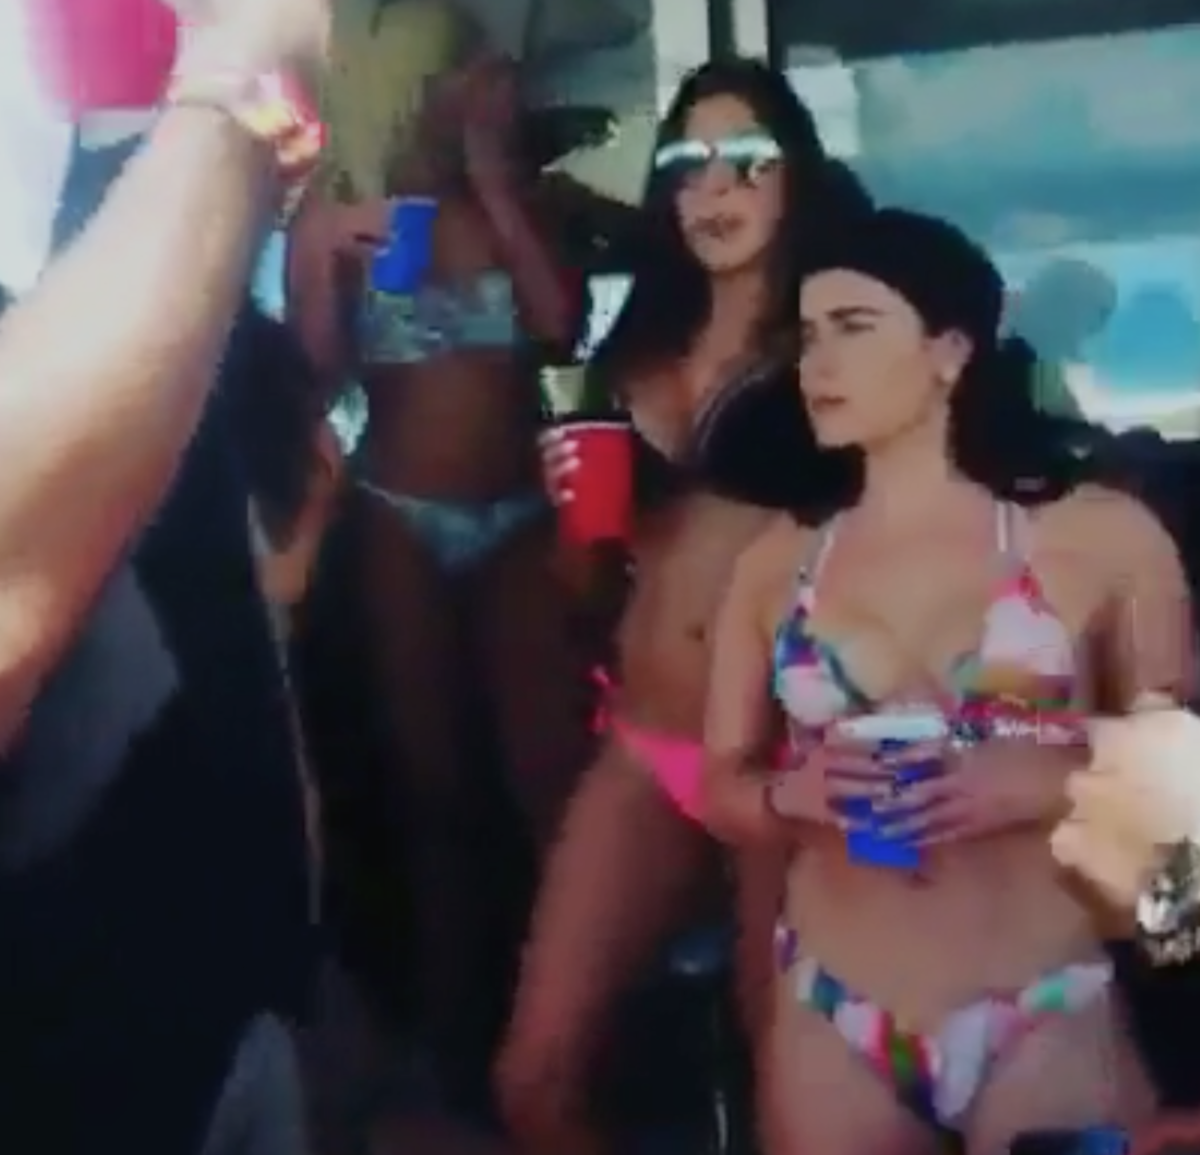 Kyrie Irving partying on yacht with bikini clad women.